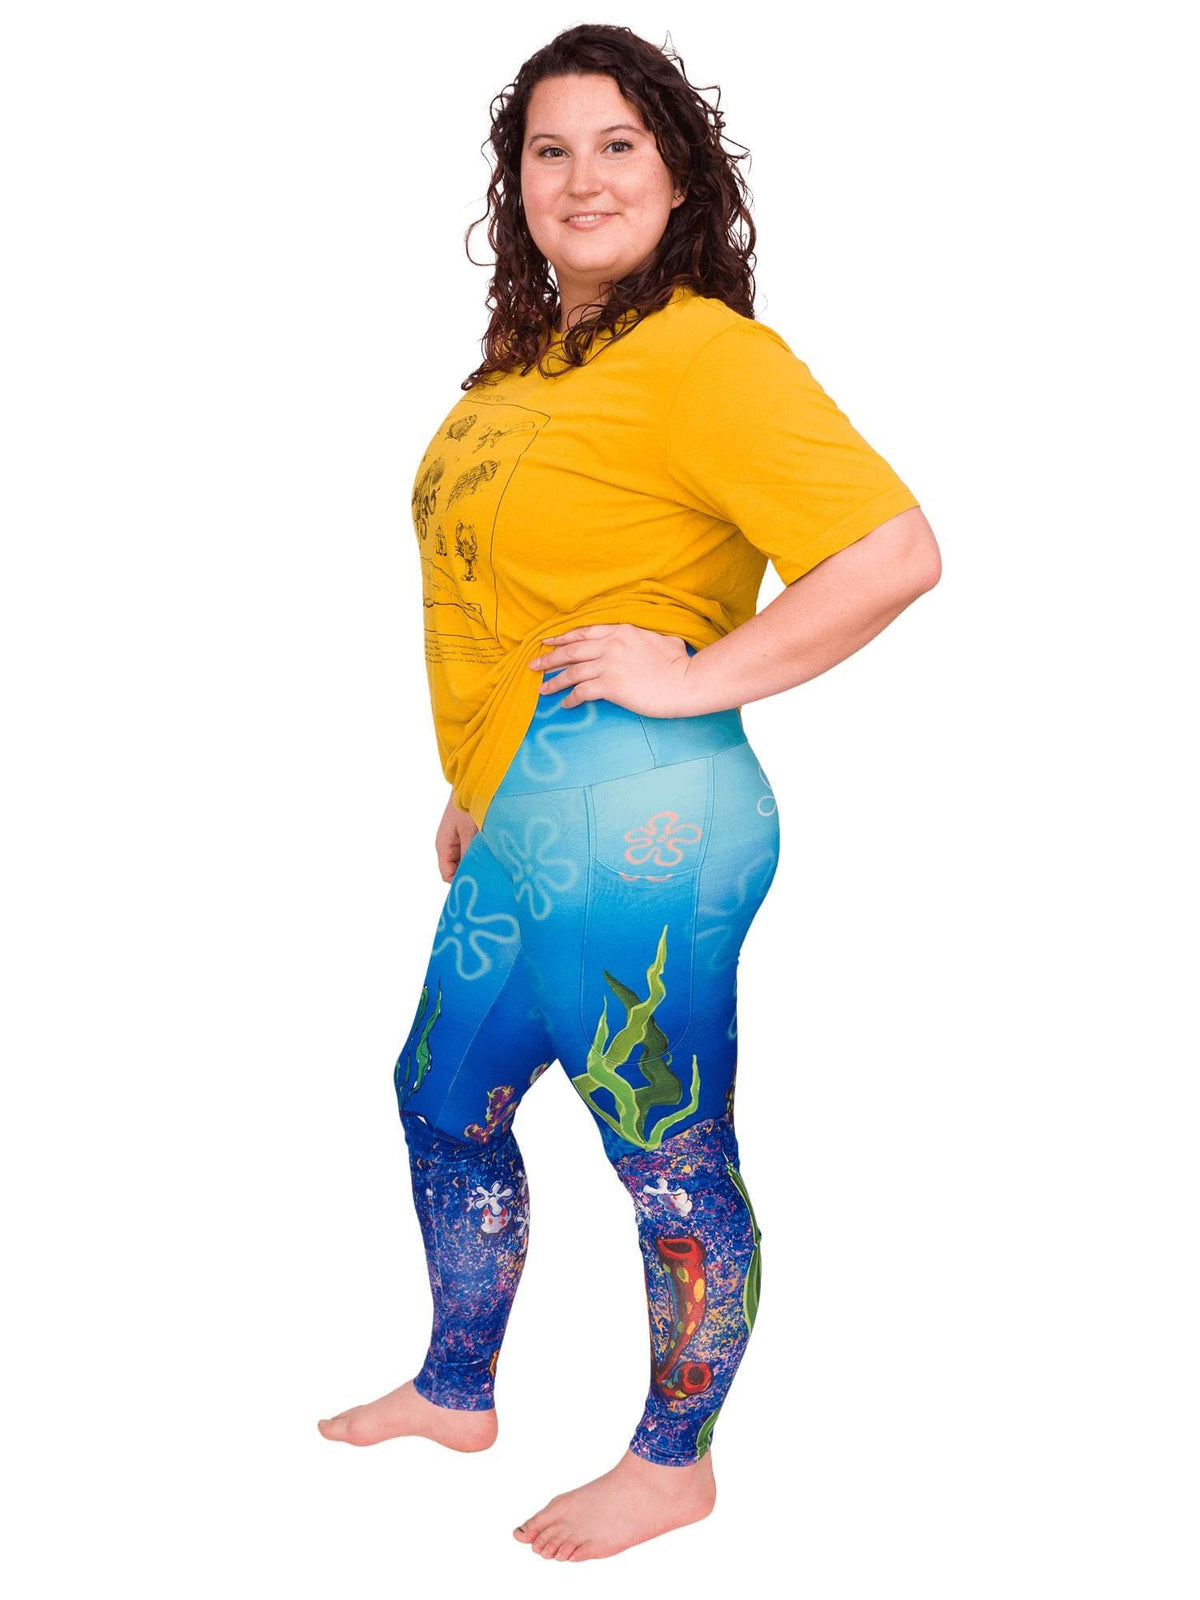 Model: Kela is a marine conservationist who strives to connect students with educational opportunities to help expand the reach of the marine science field. She is 5’5”, 185 lbs, 36F and is wearing a size L tee and XL legging.